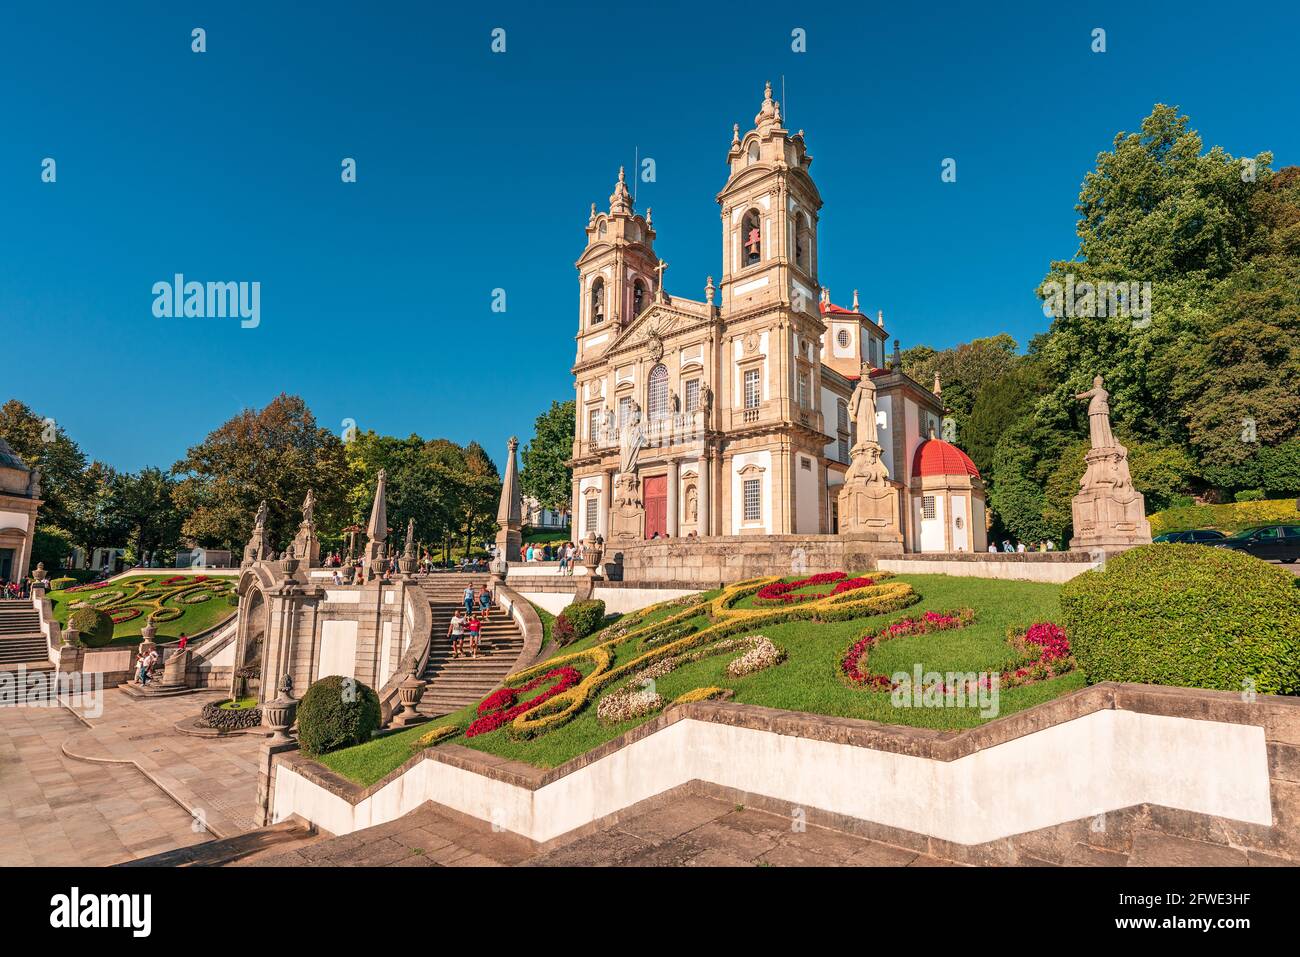 Tenões, Portugal. August 22, 2020. Exterior view of the neoclassical church 'Bom Jesus do Monte' in Braga. Sunny day with tourists. Stock Photo